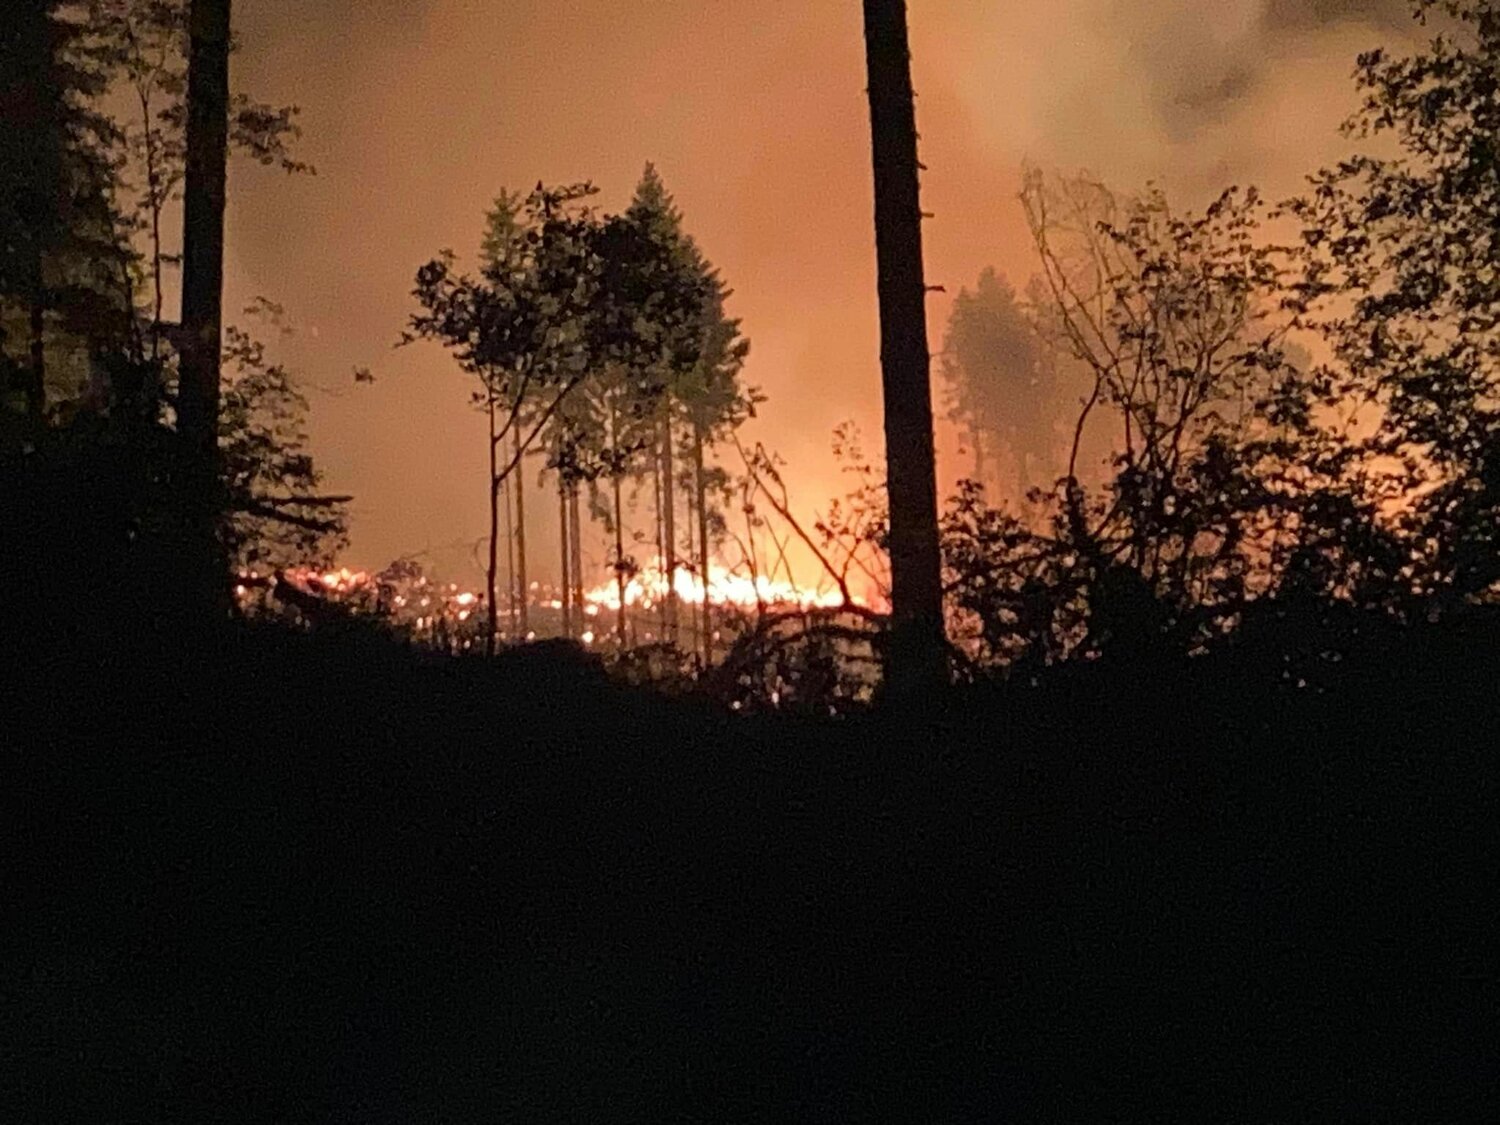 A fire that started Saturday night in Capitol Forest and burned about 40 acres is largely contained, West Thurston Fire officials announced in an update about 5 p.m. Sunday.